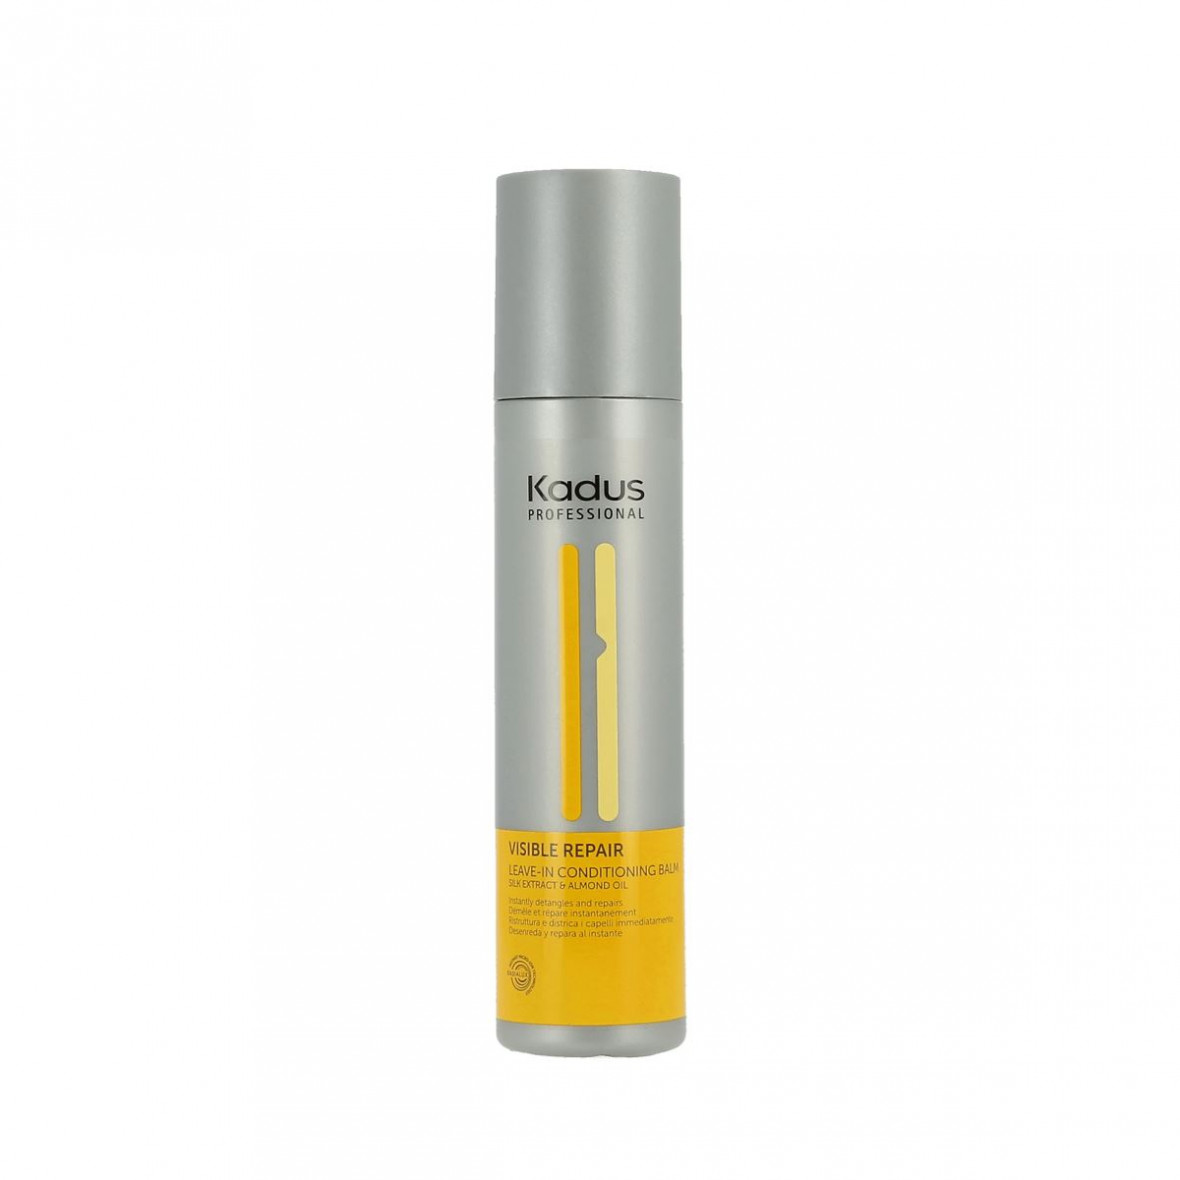 Kadus Professional Visible Repair Leave - In Conditioning Balm